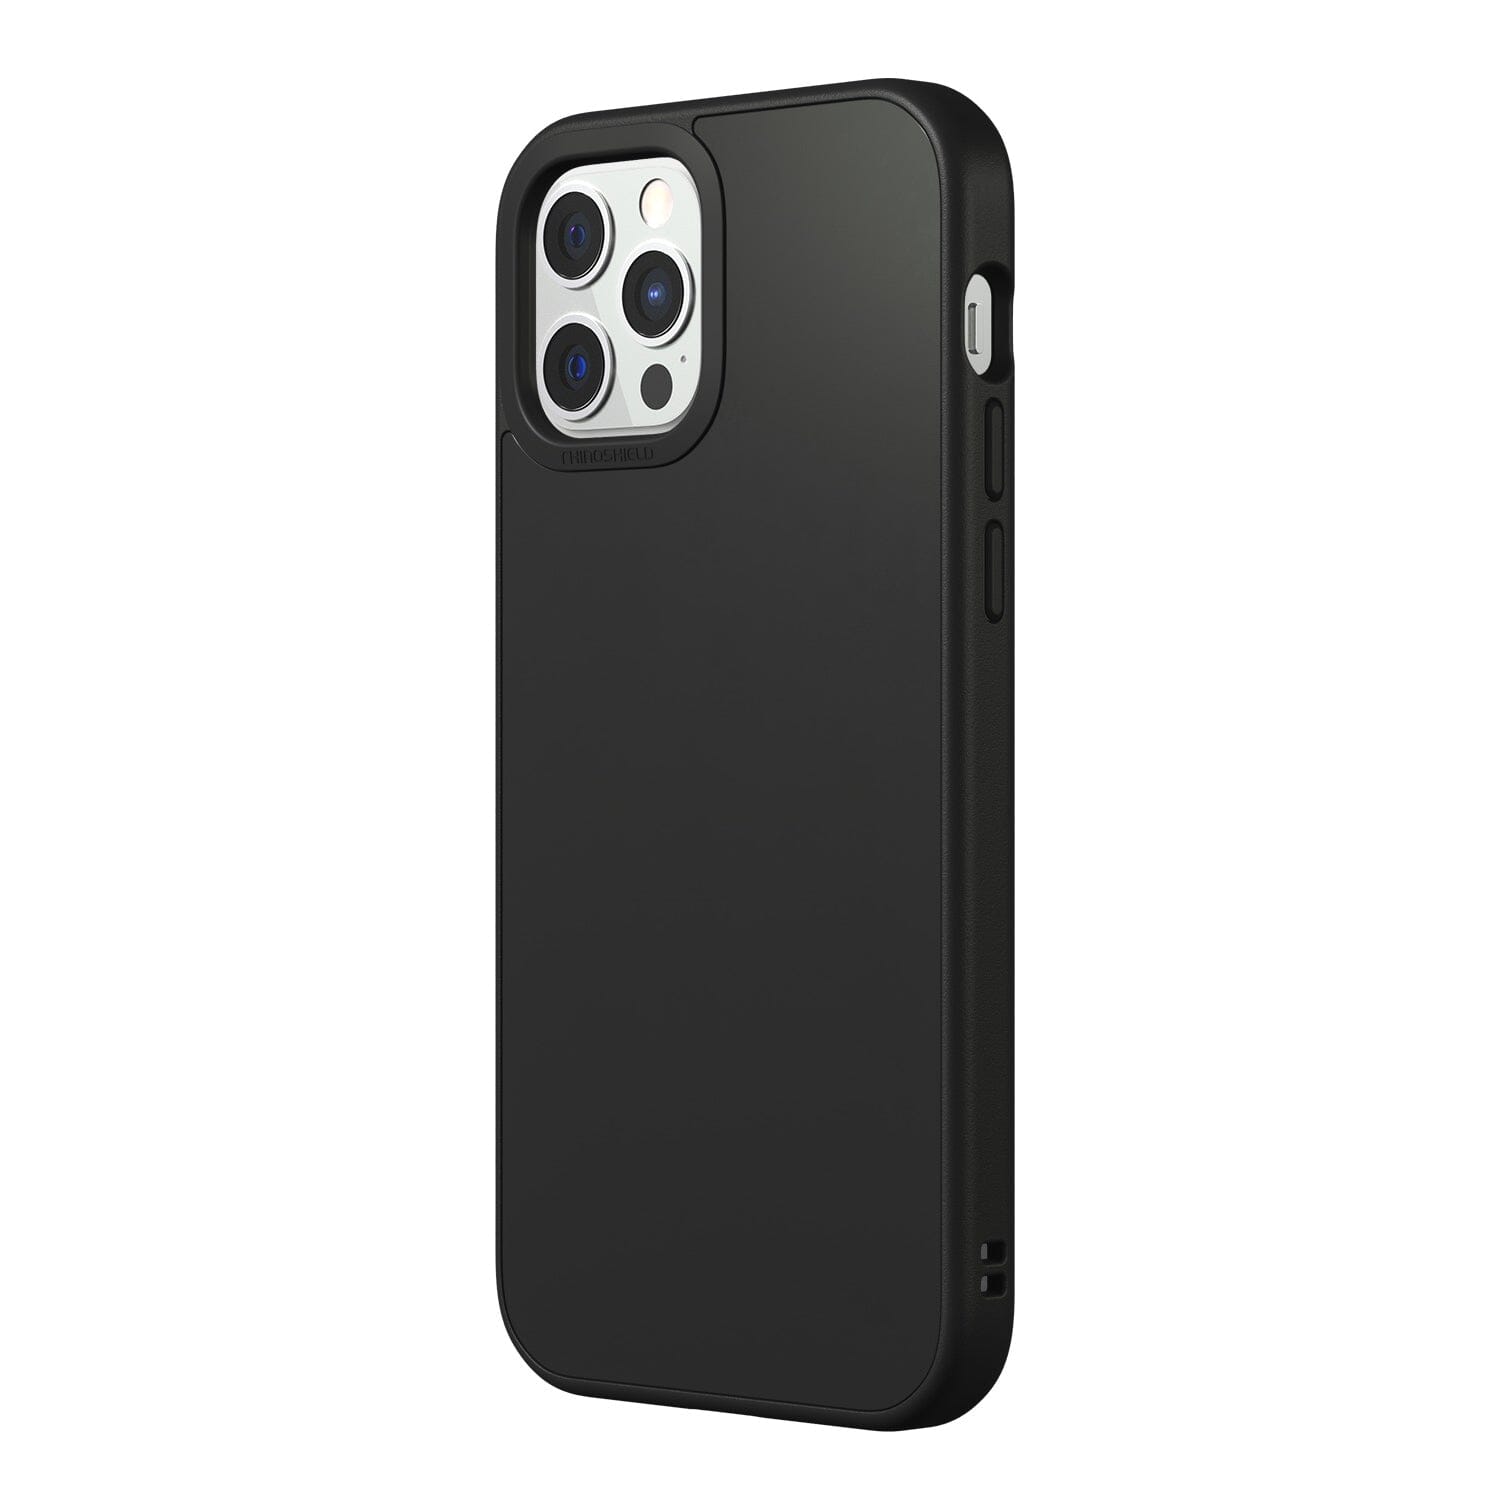 RhinoShield SolidSuit Protective Case with Premium Finish for iPhone 12 Series (2020) iPhone 12 Series RhinoShield iPhone 12 Pro Max 6.7" Classic Black 